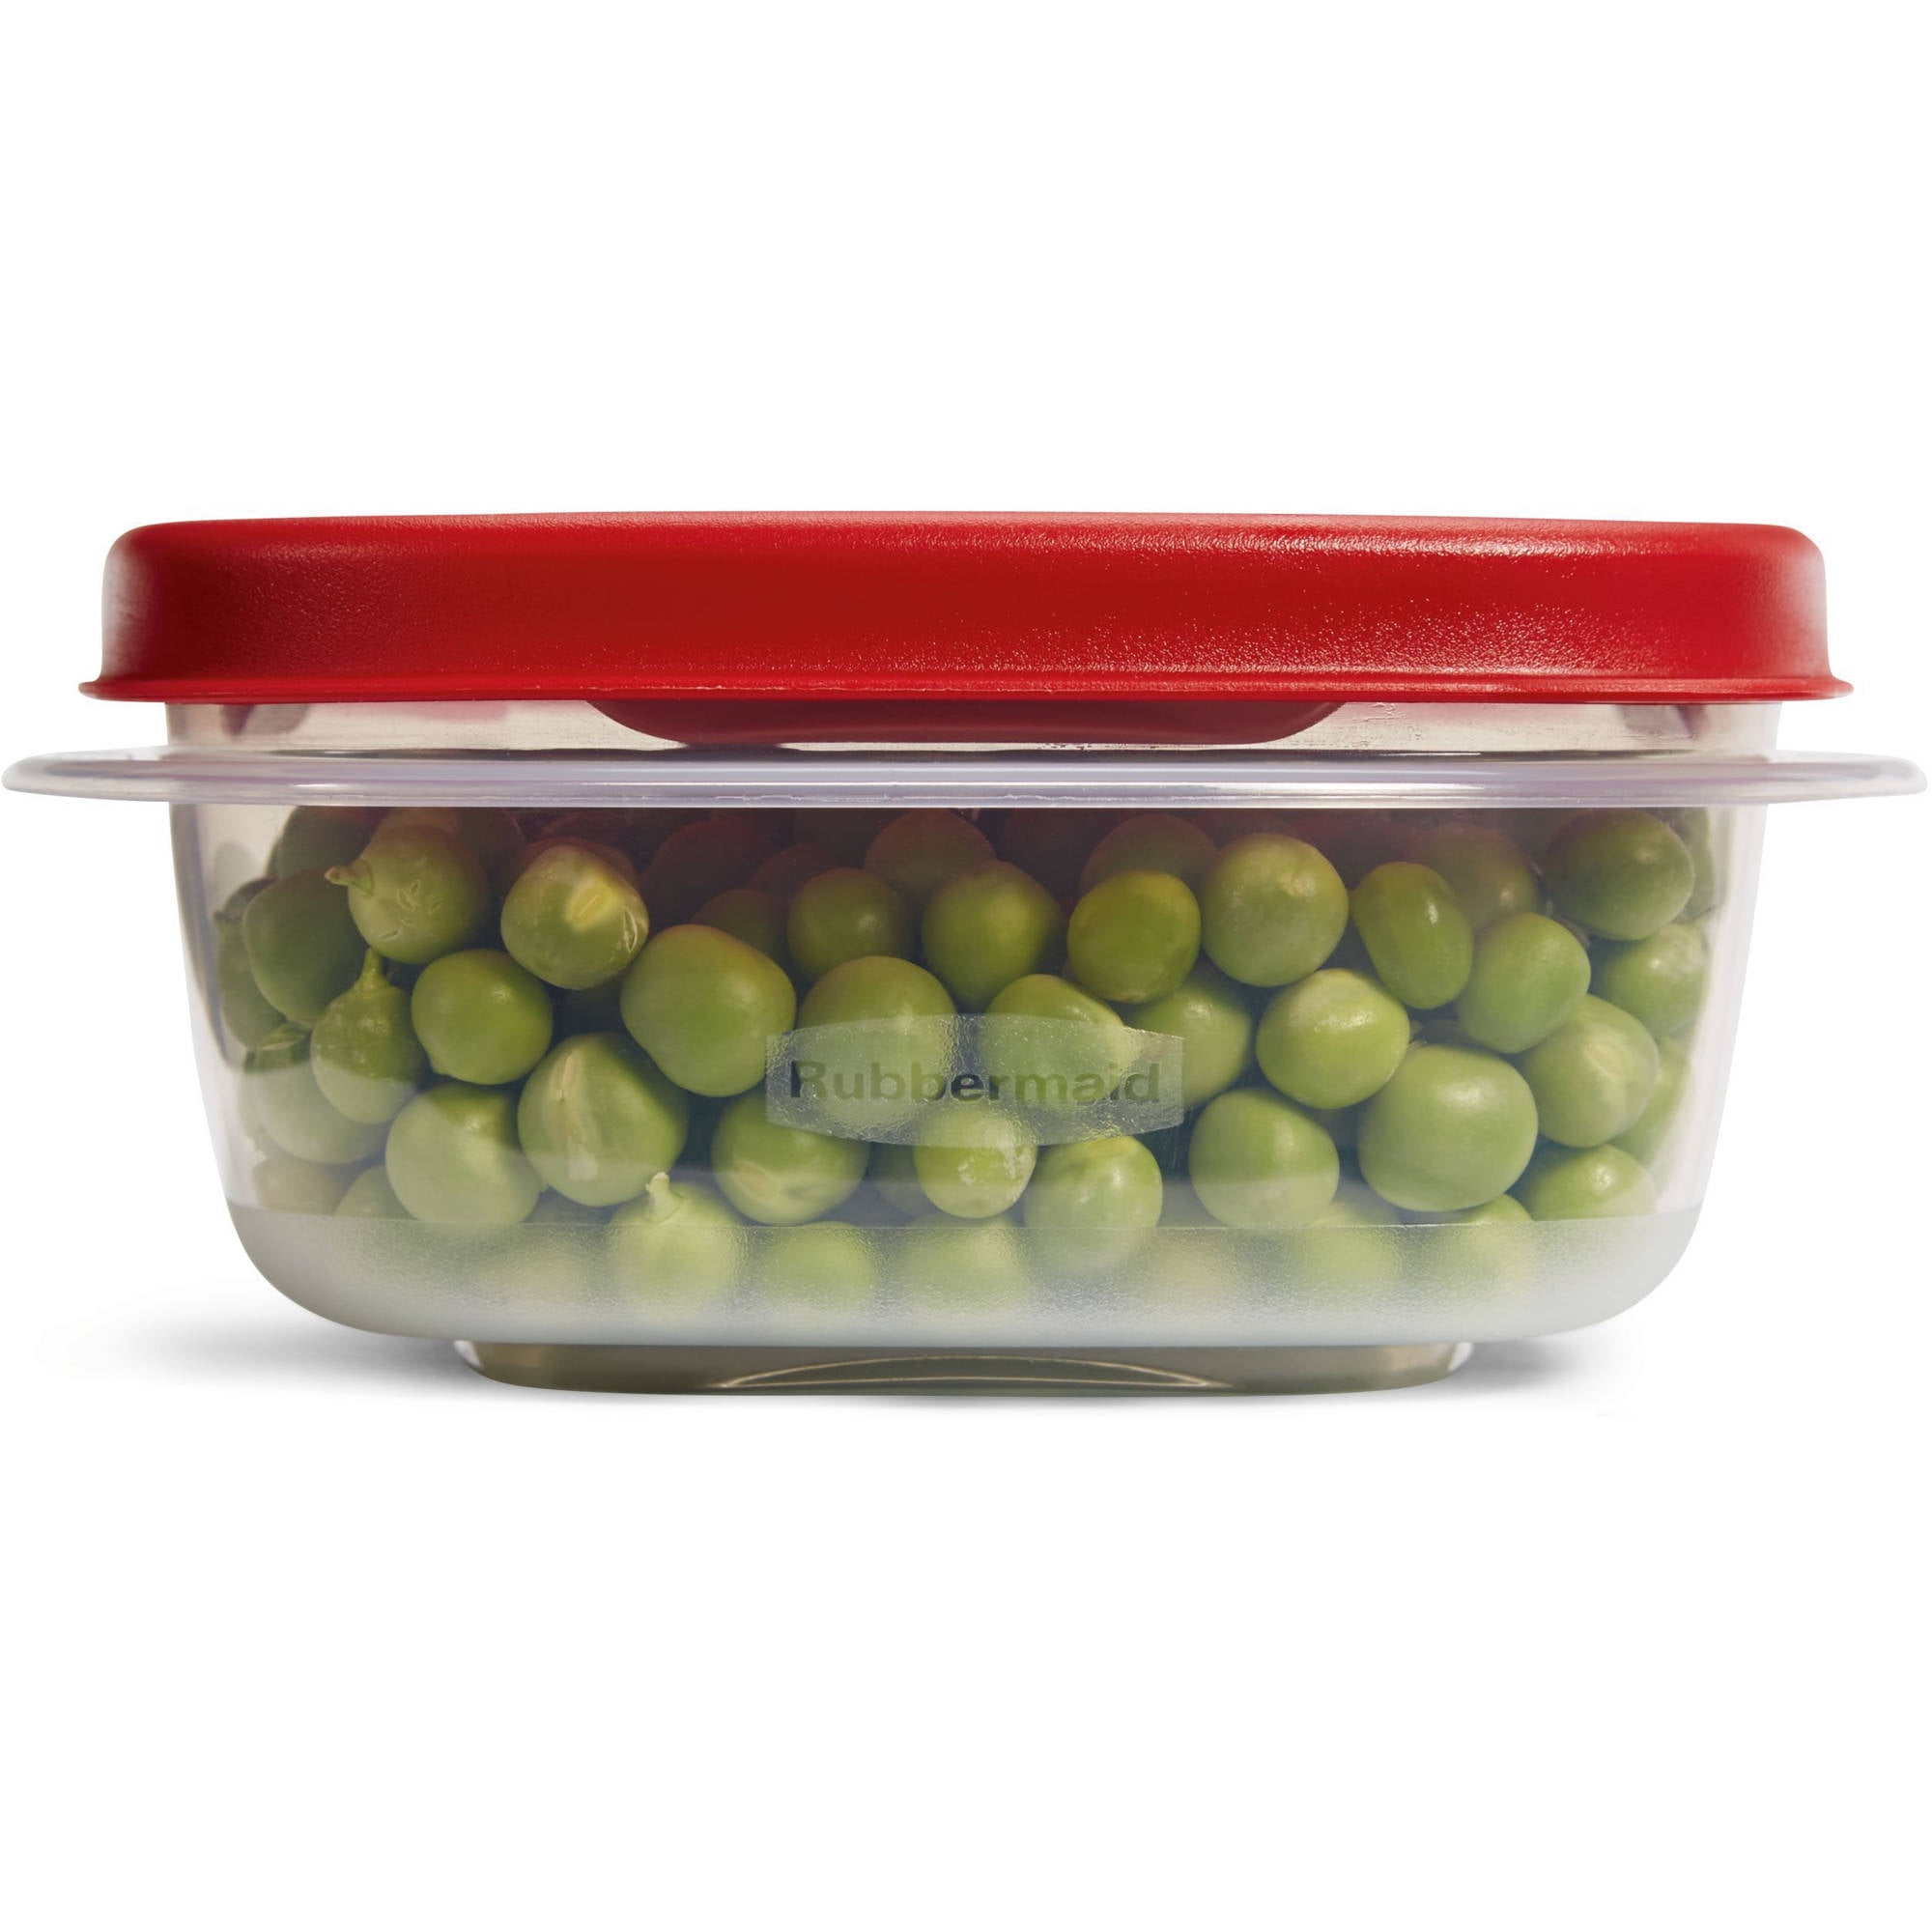 Rubbermaid® 1777164 Easy Find Lids™ Food Storage Container, 40-Cup